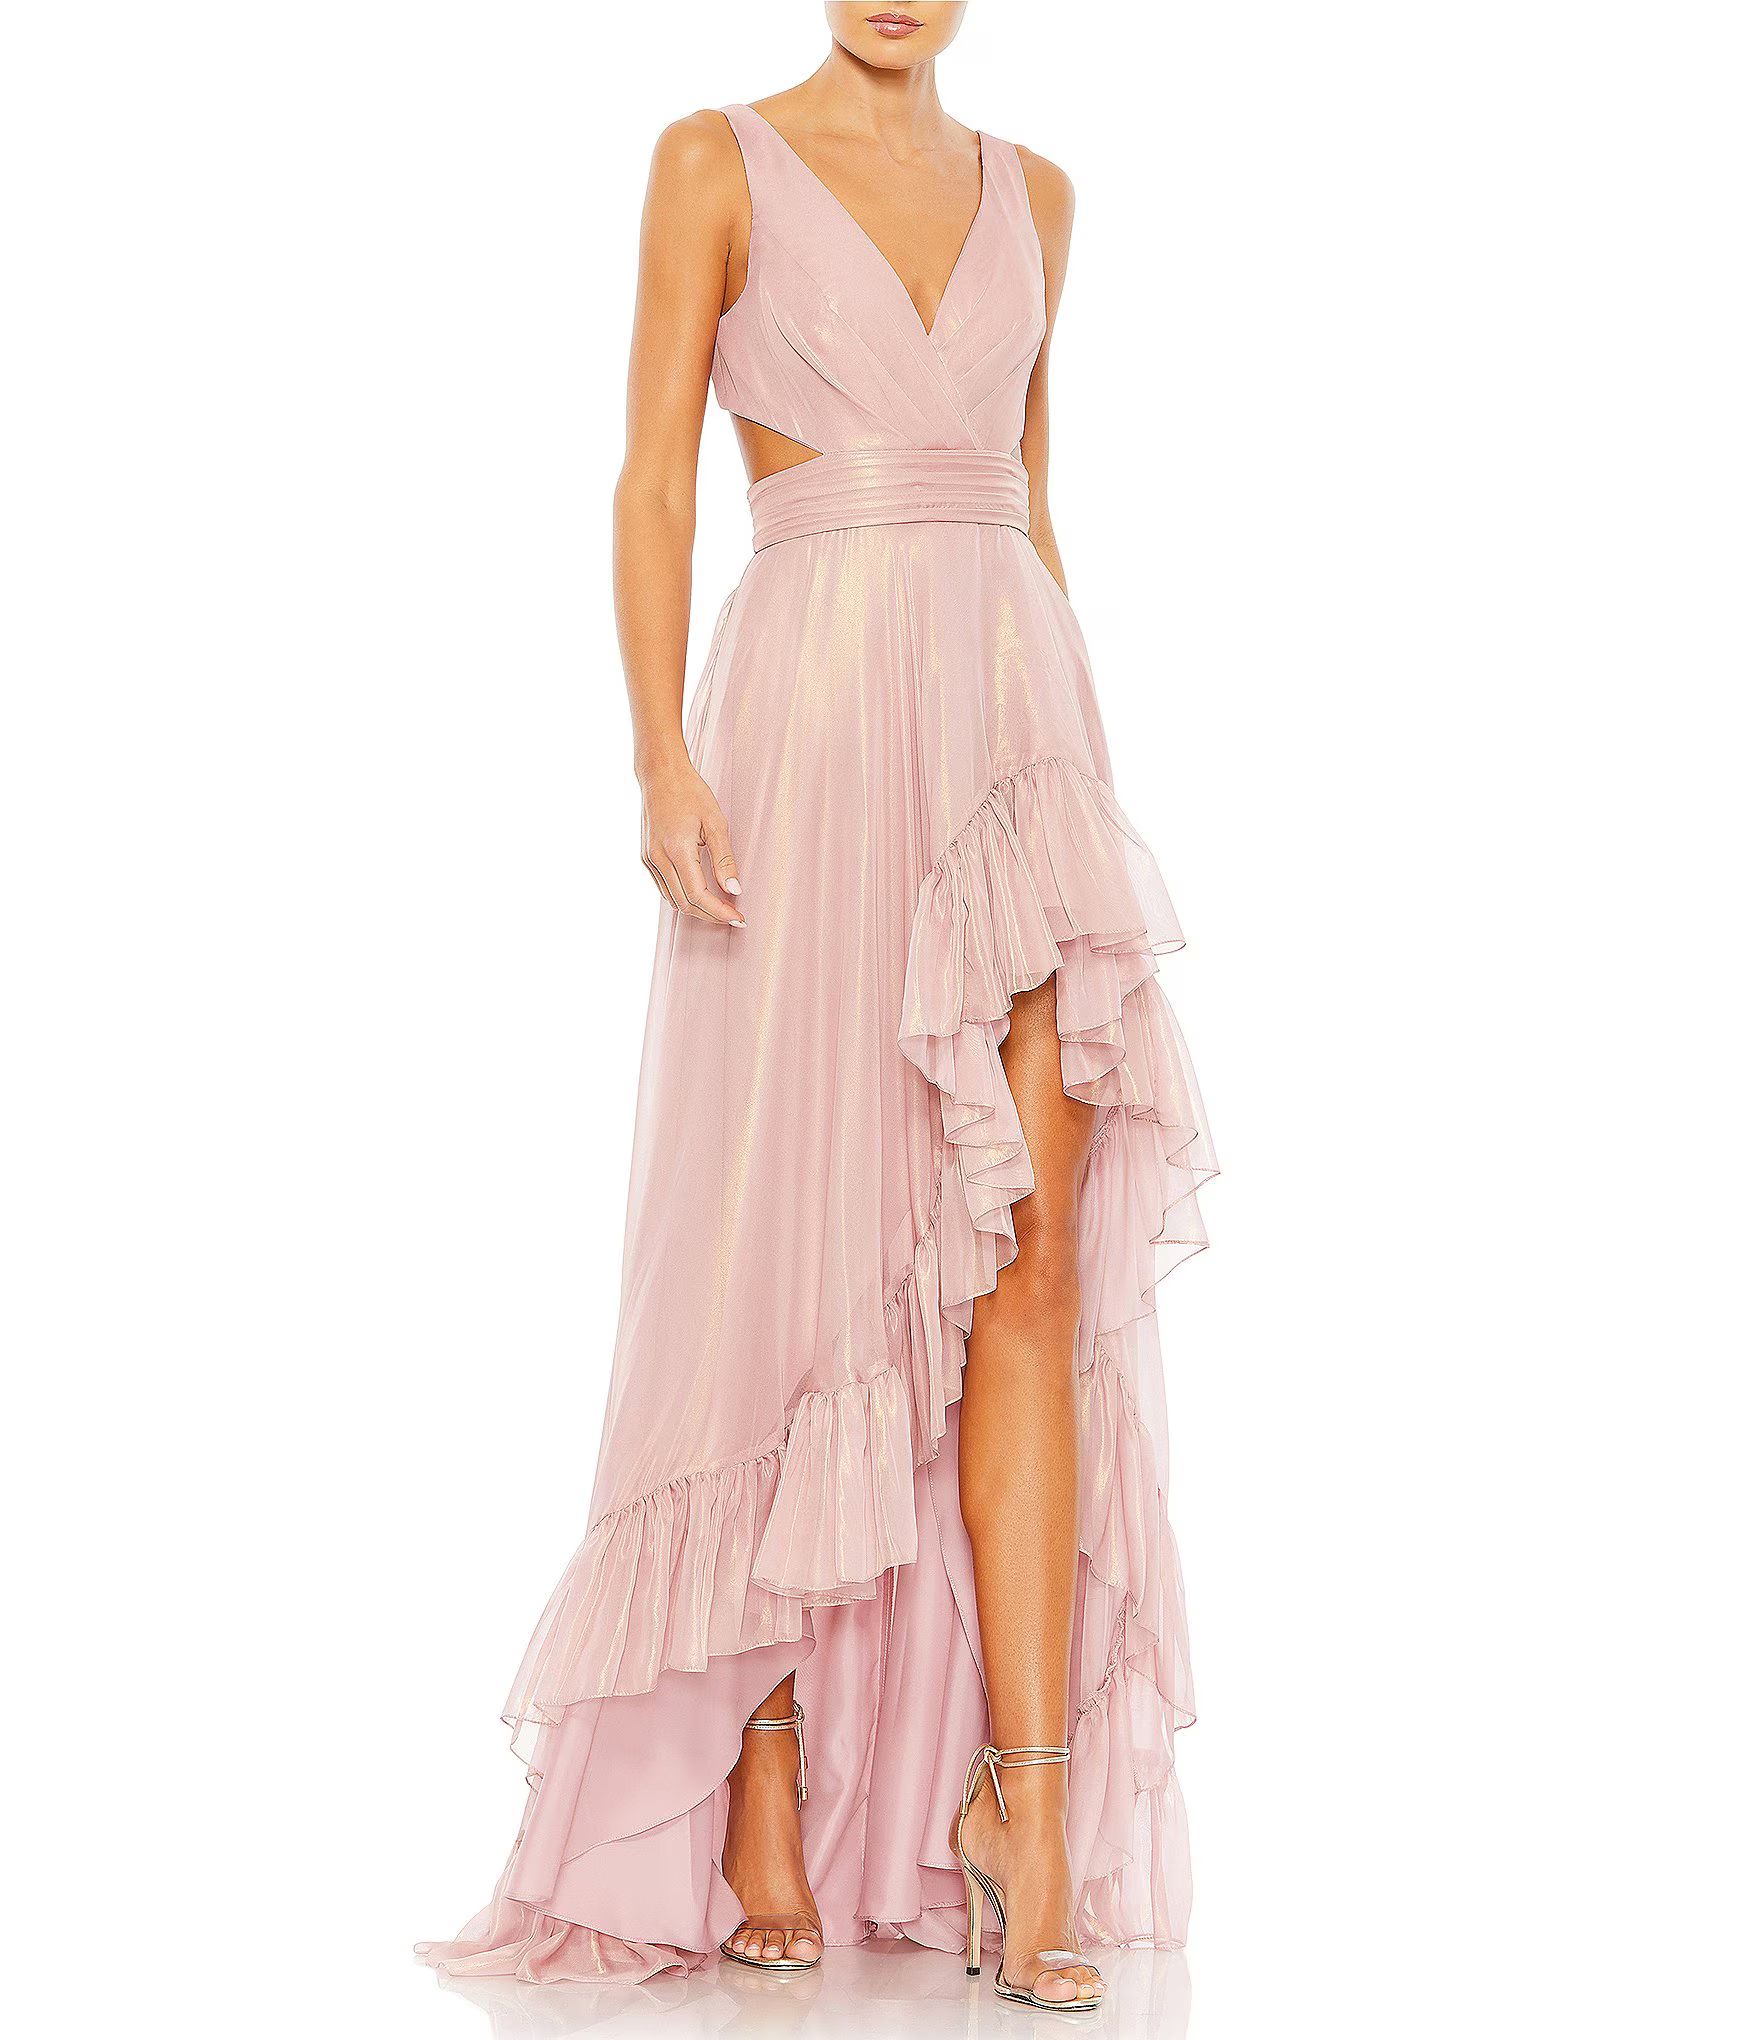 Surplice V-Neck Sleeveless Cut-Out Tie Back Detail Tiered Ruffle Hem High-Low Gown | Dillard's